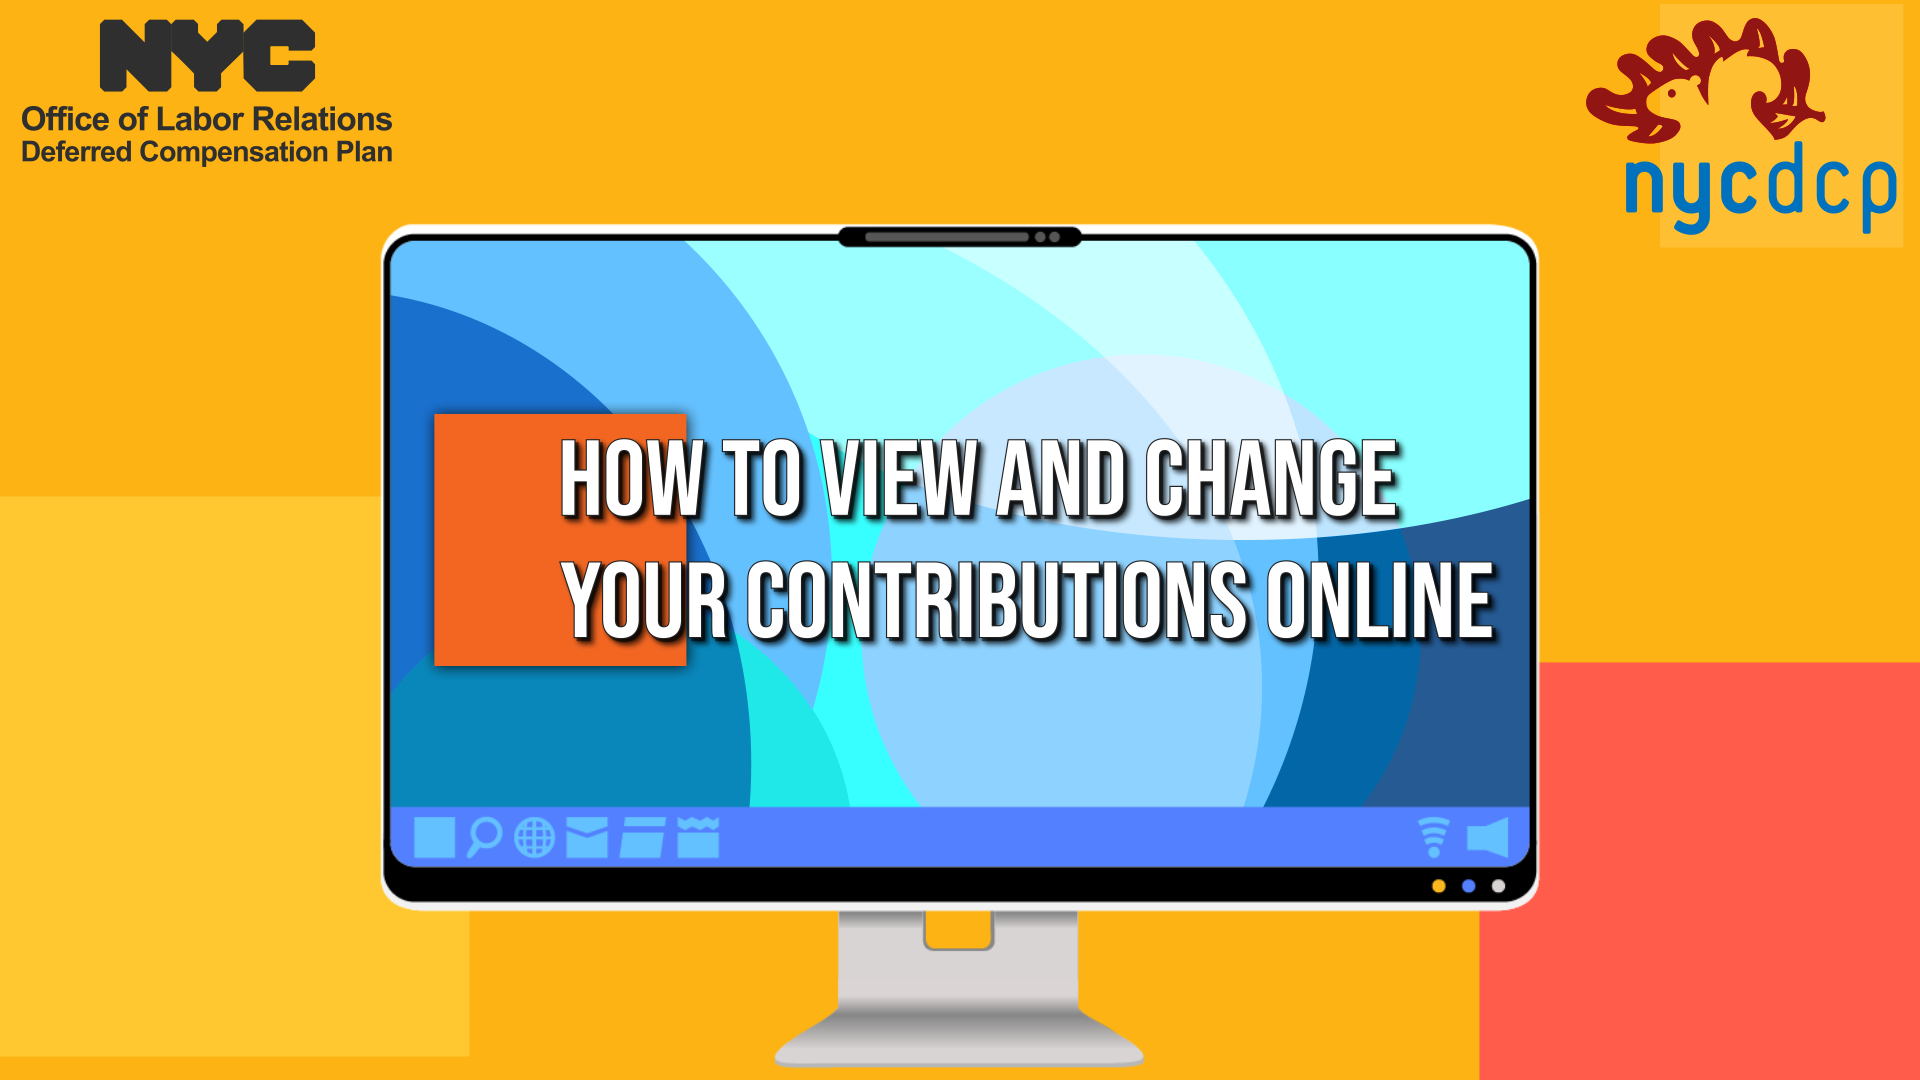 How to View and Change Your Contributions Online